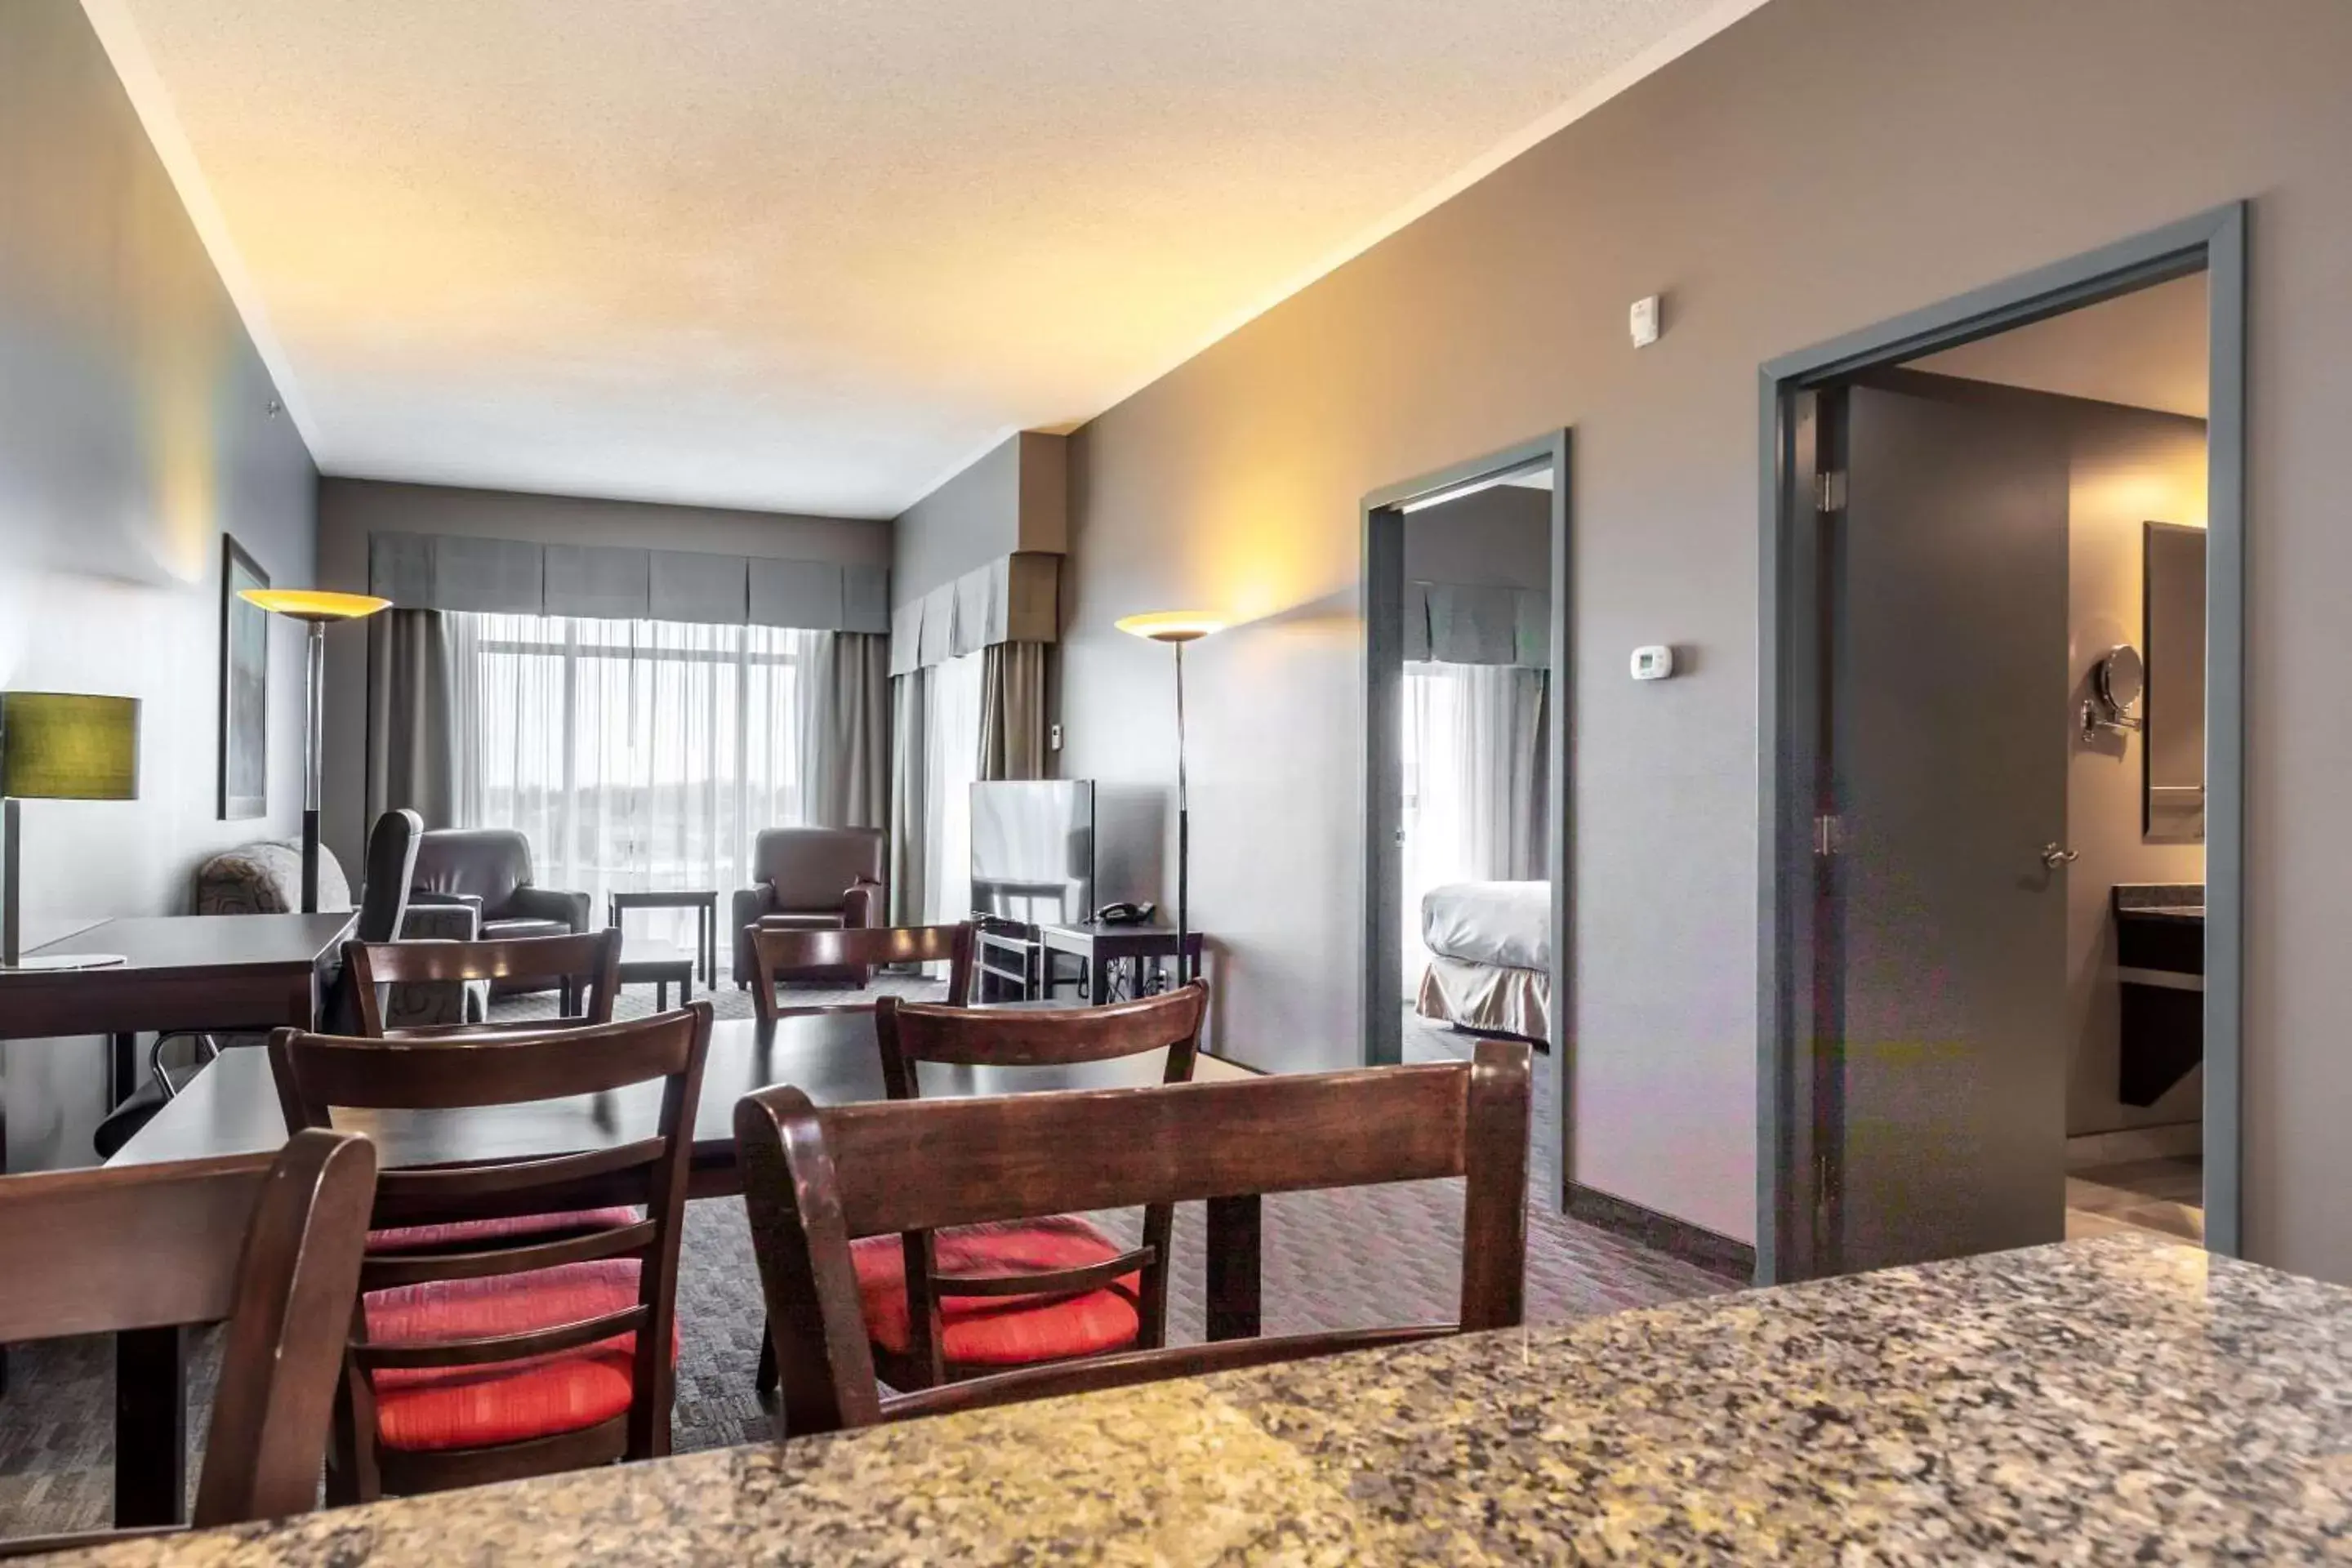 Bedroom, Dining Area in Quality Inn & Suites Victoriaville